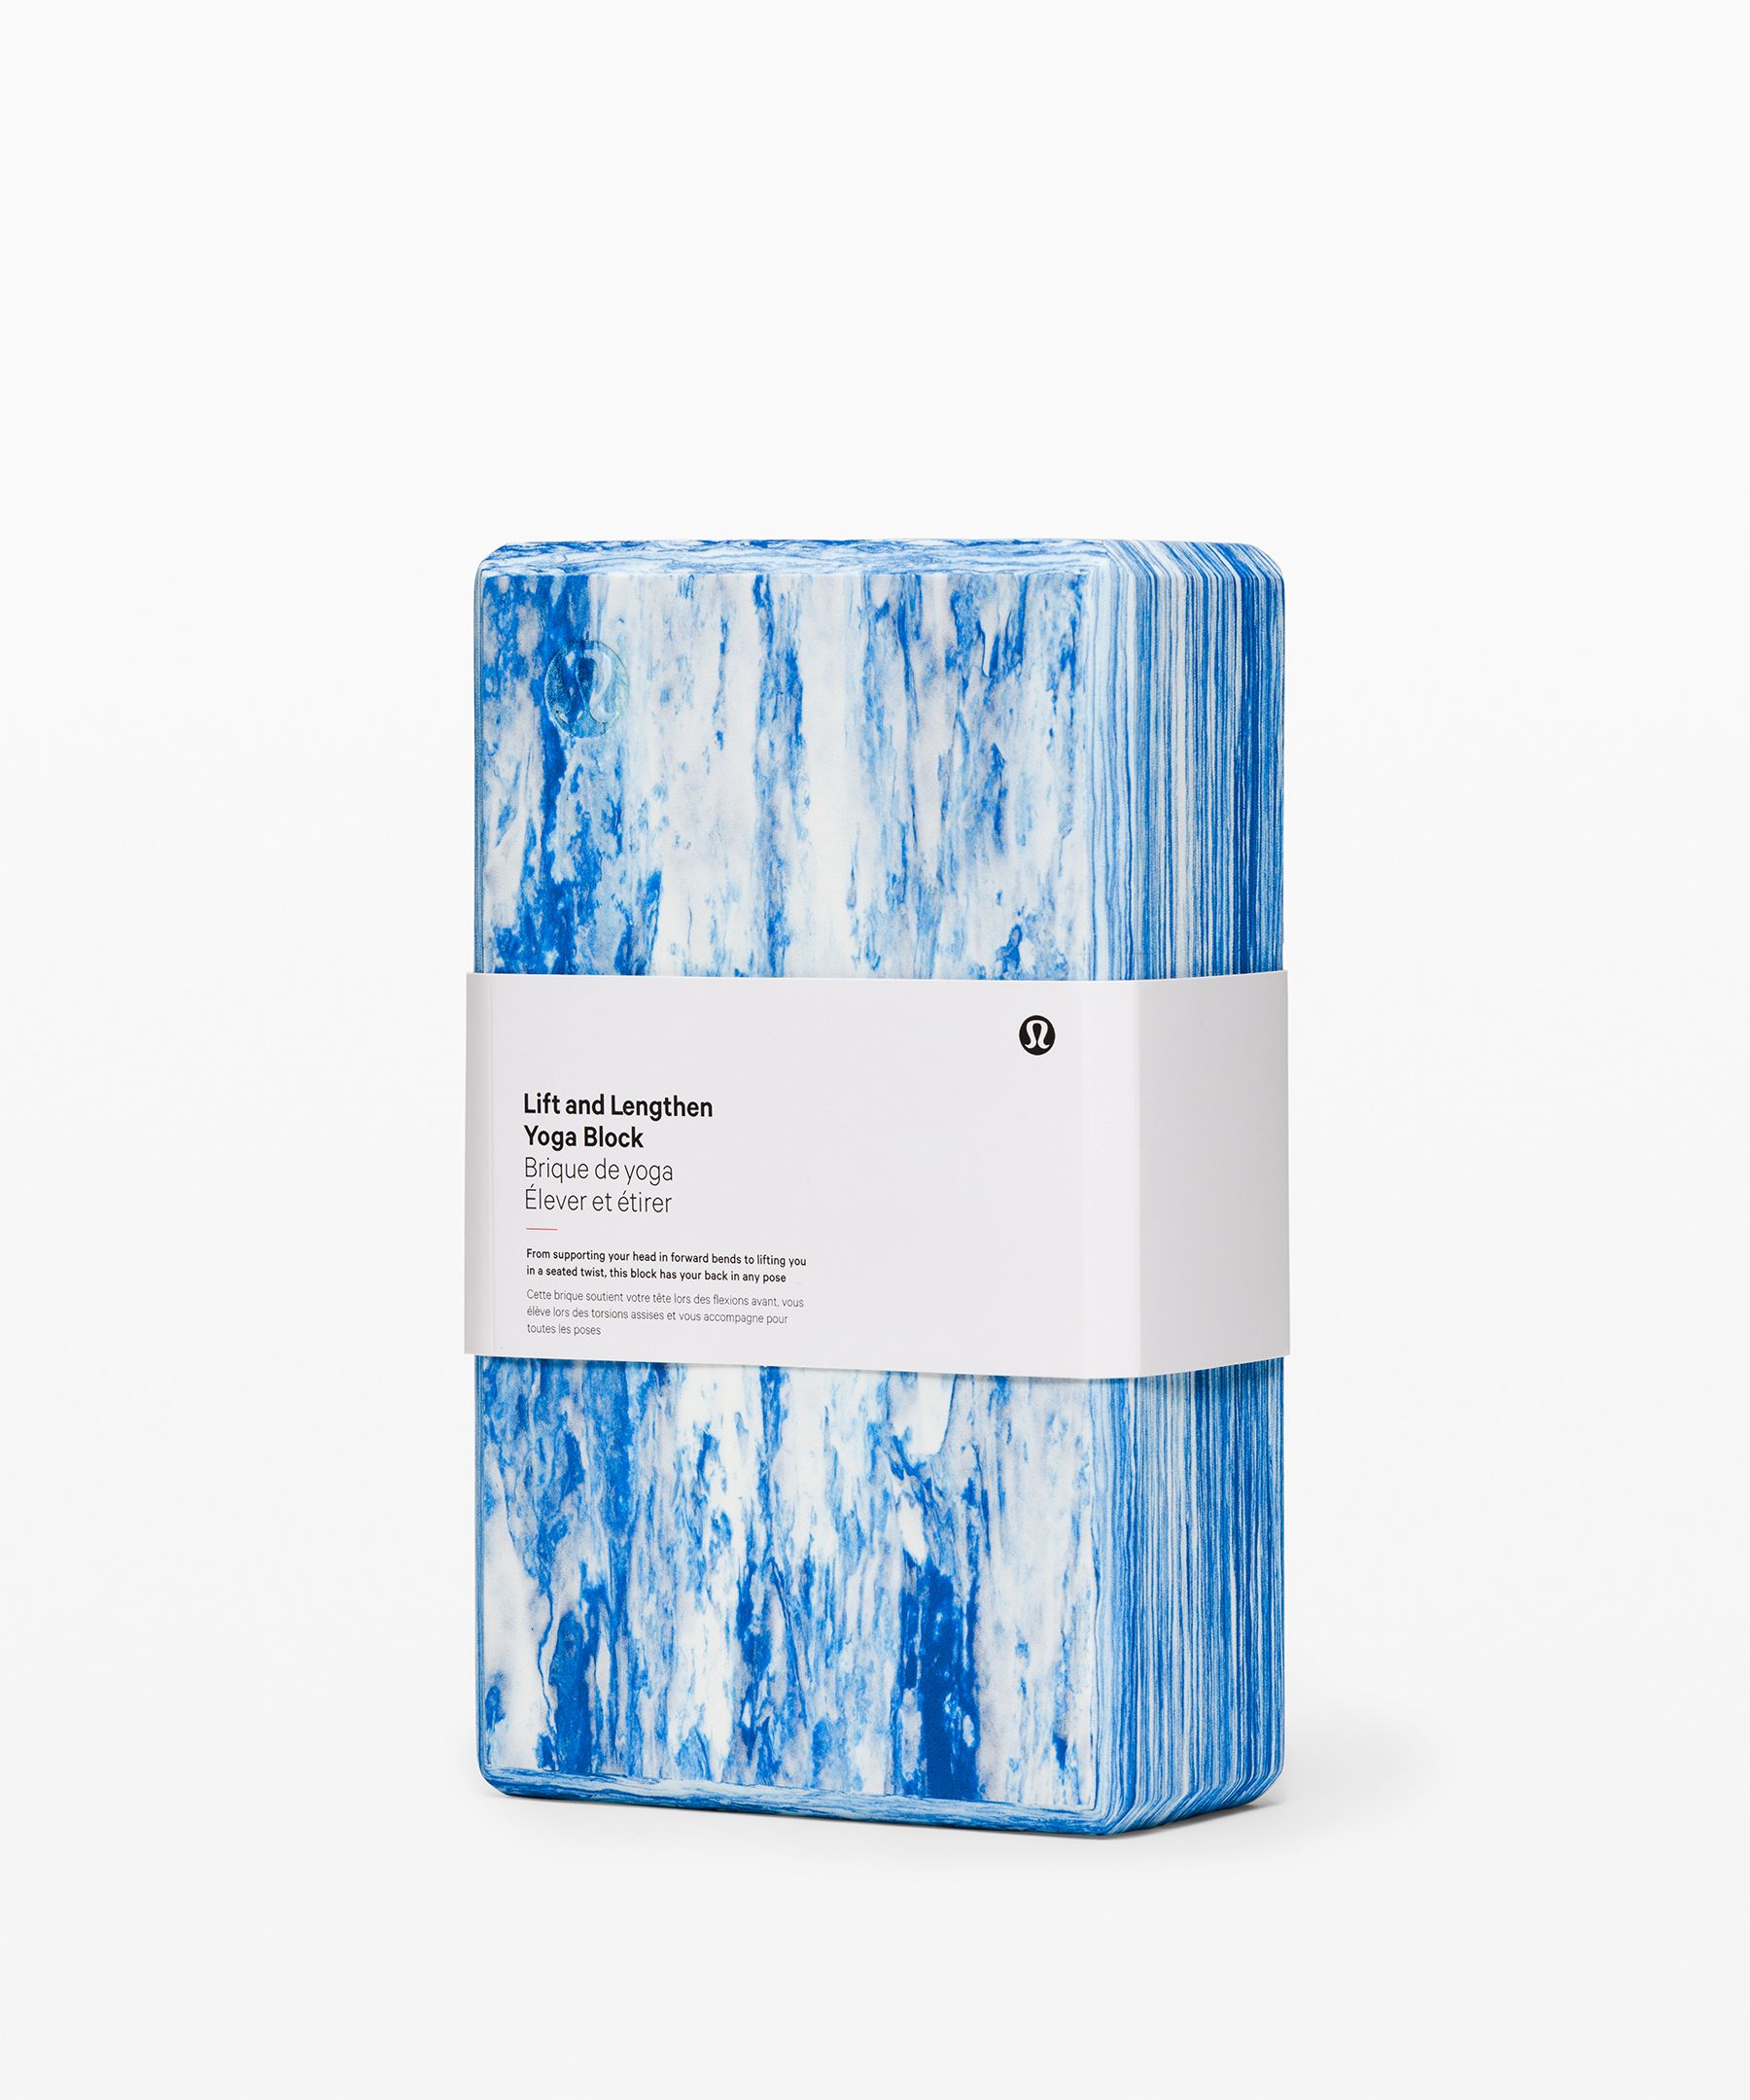 Lululemon Lift And Lengthen Yoga Block In Northern Blue/white